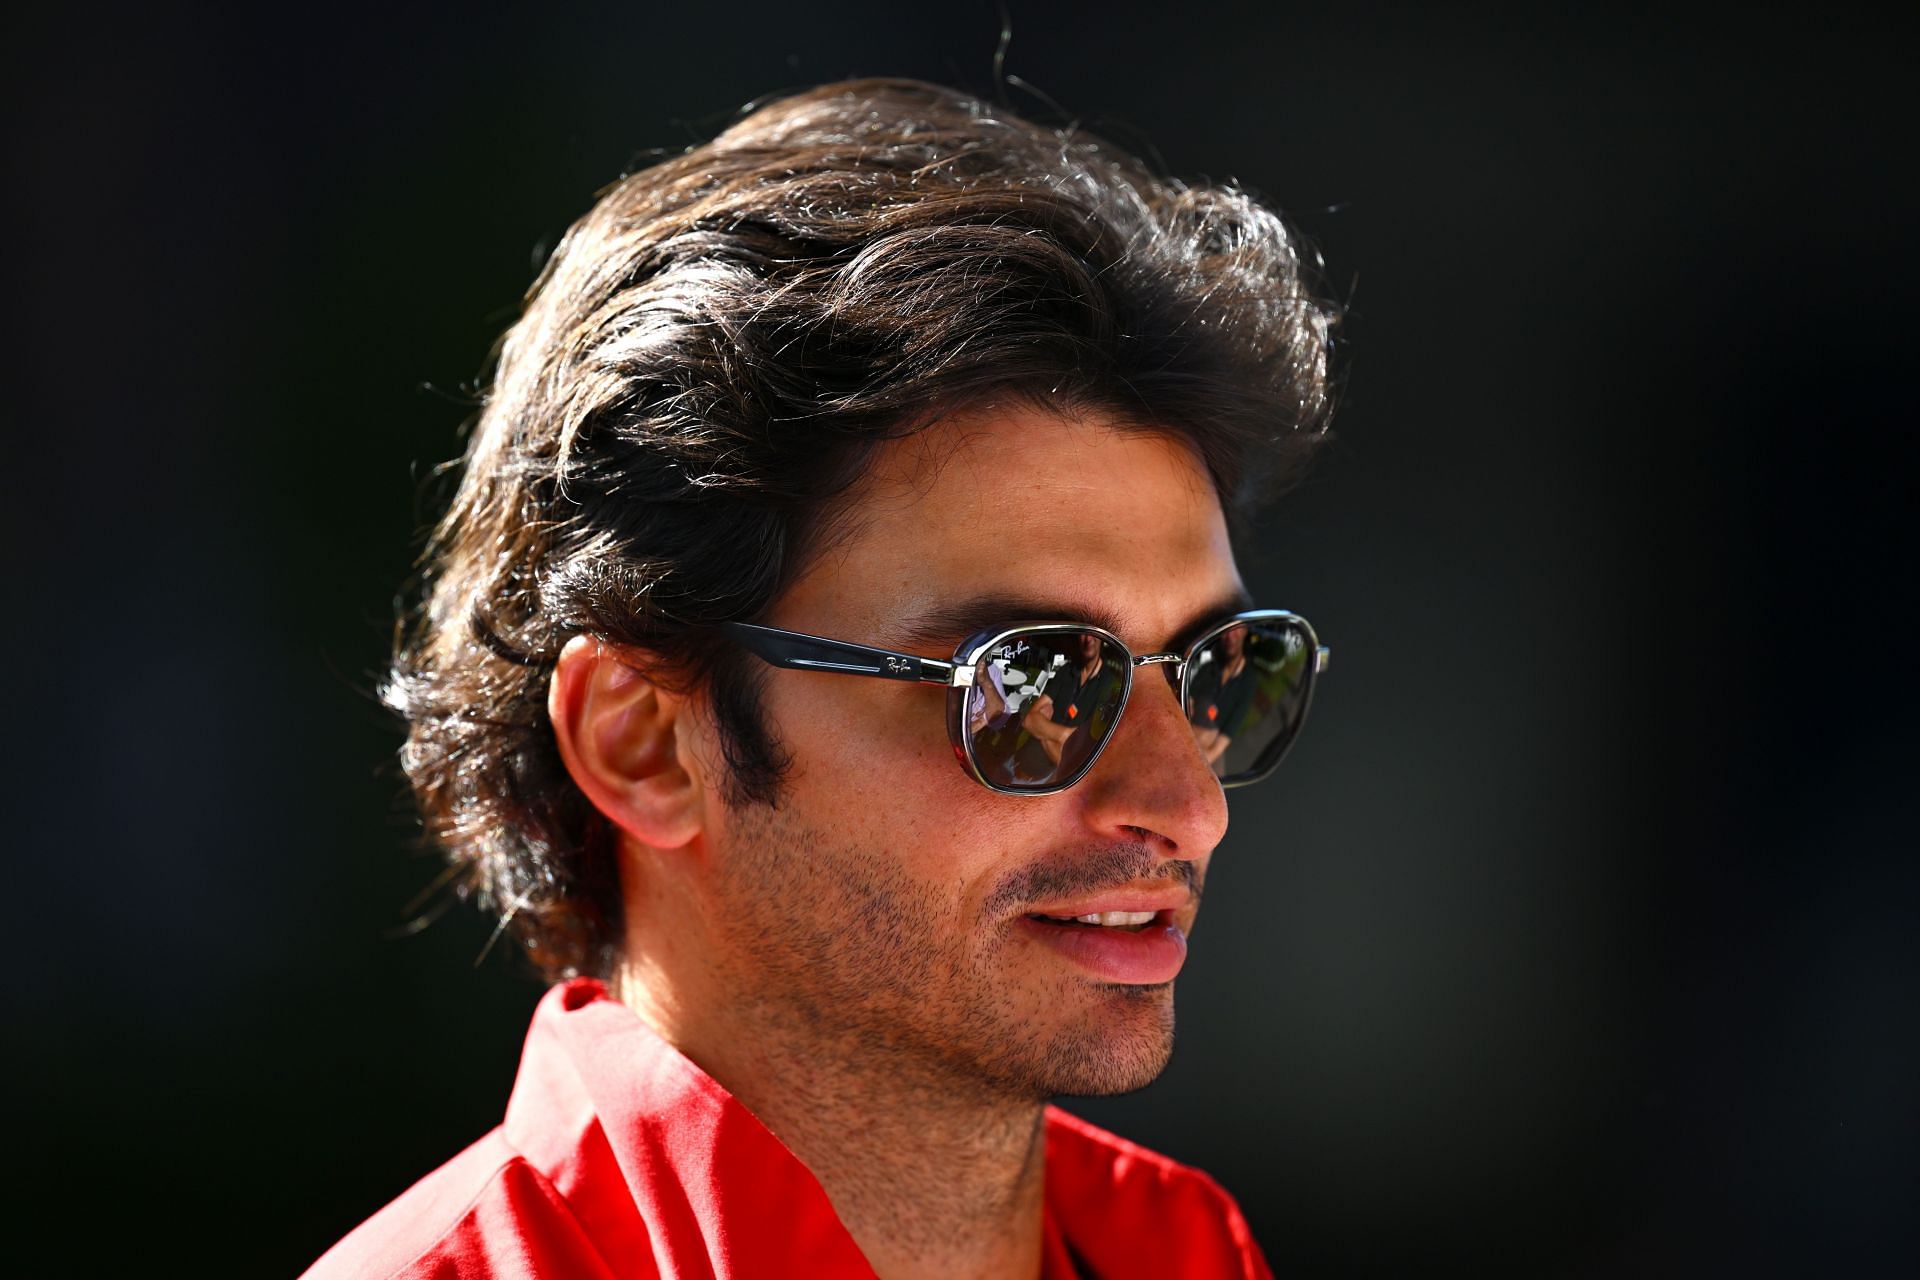 Carlos Sainz of Spain and Ferrari looks on in the Paddock prior to practice ahead of the F1 Grand Prix of Australia at Melbourne Grand Prix Circuit on April 08, 2022 in Melbourne, Australia. (Photo by Clive Mason/Getty Images)